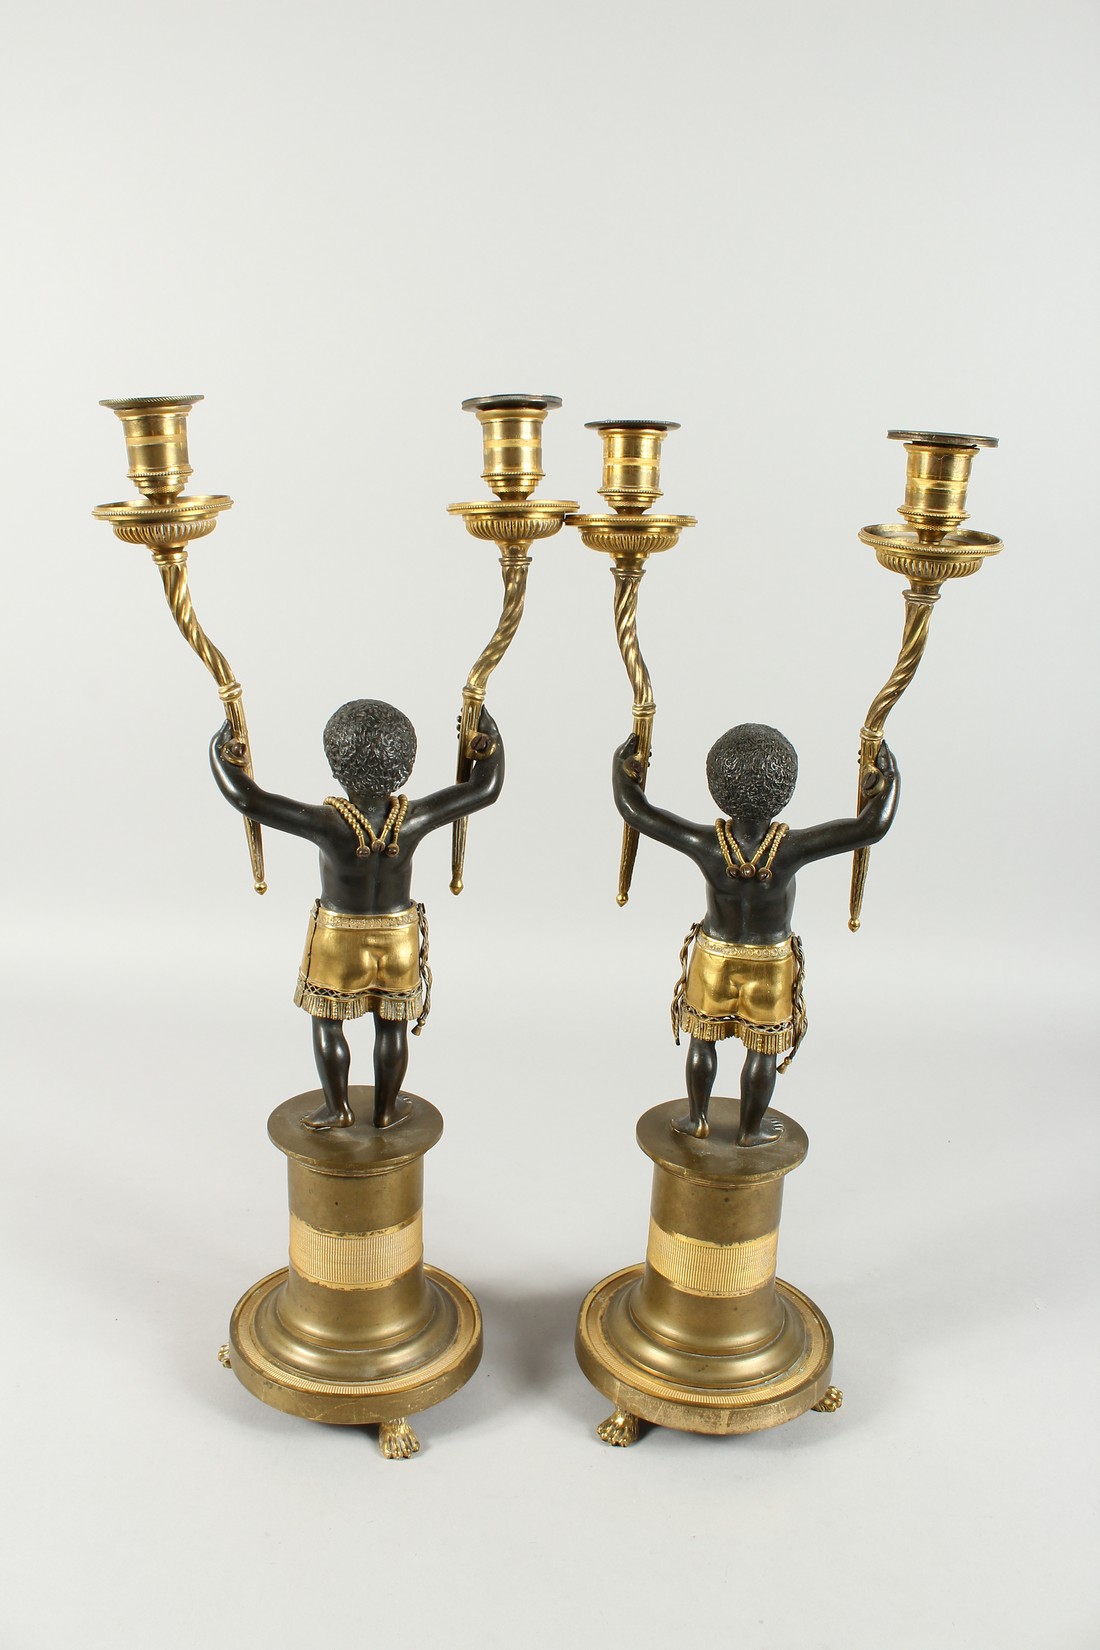 A SUPERB PAIR OF EMPIRE BRONZE AND GILT BRONZE TWO BRANCH CANDLESTICKS of nubian children holding - Image 7 of 9